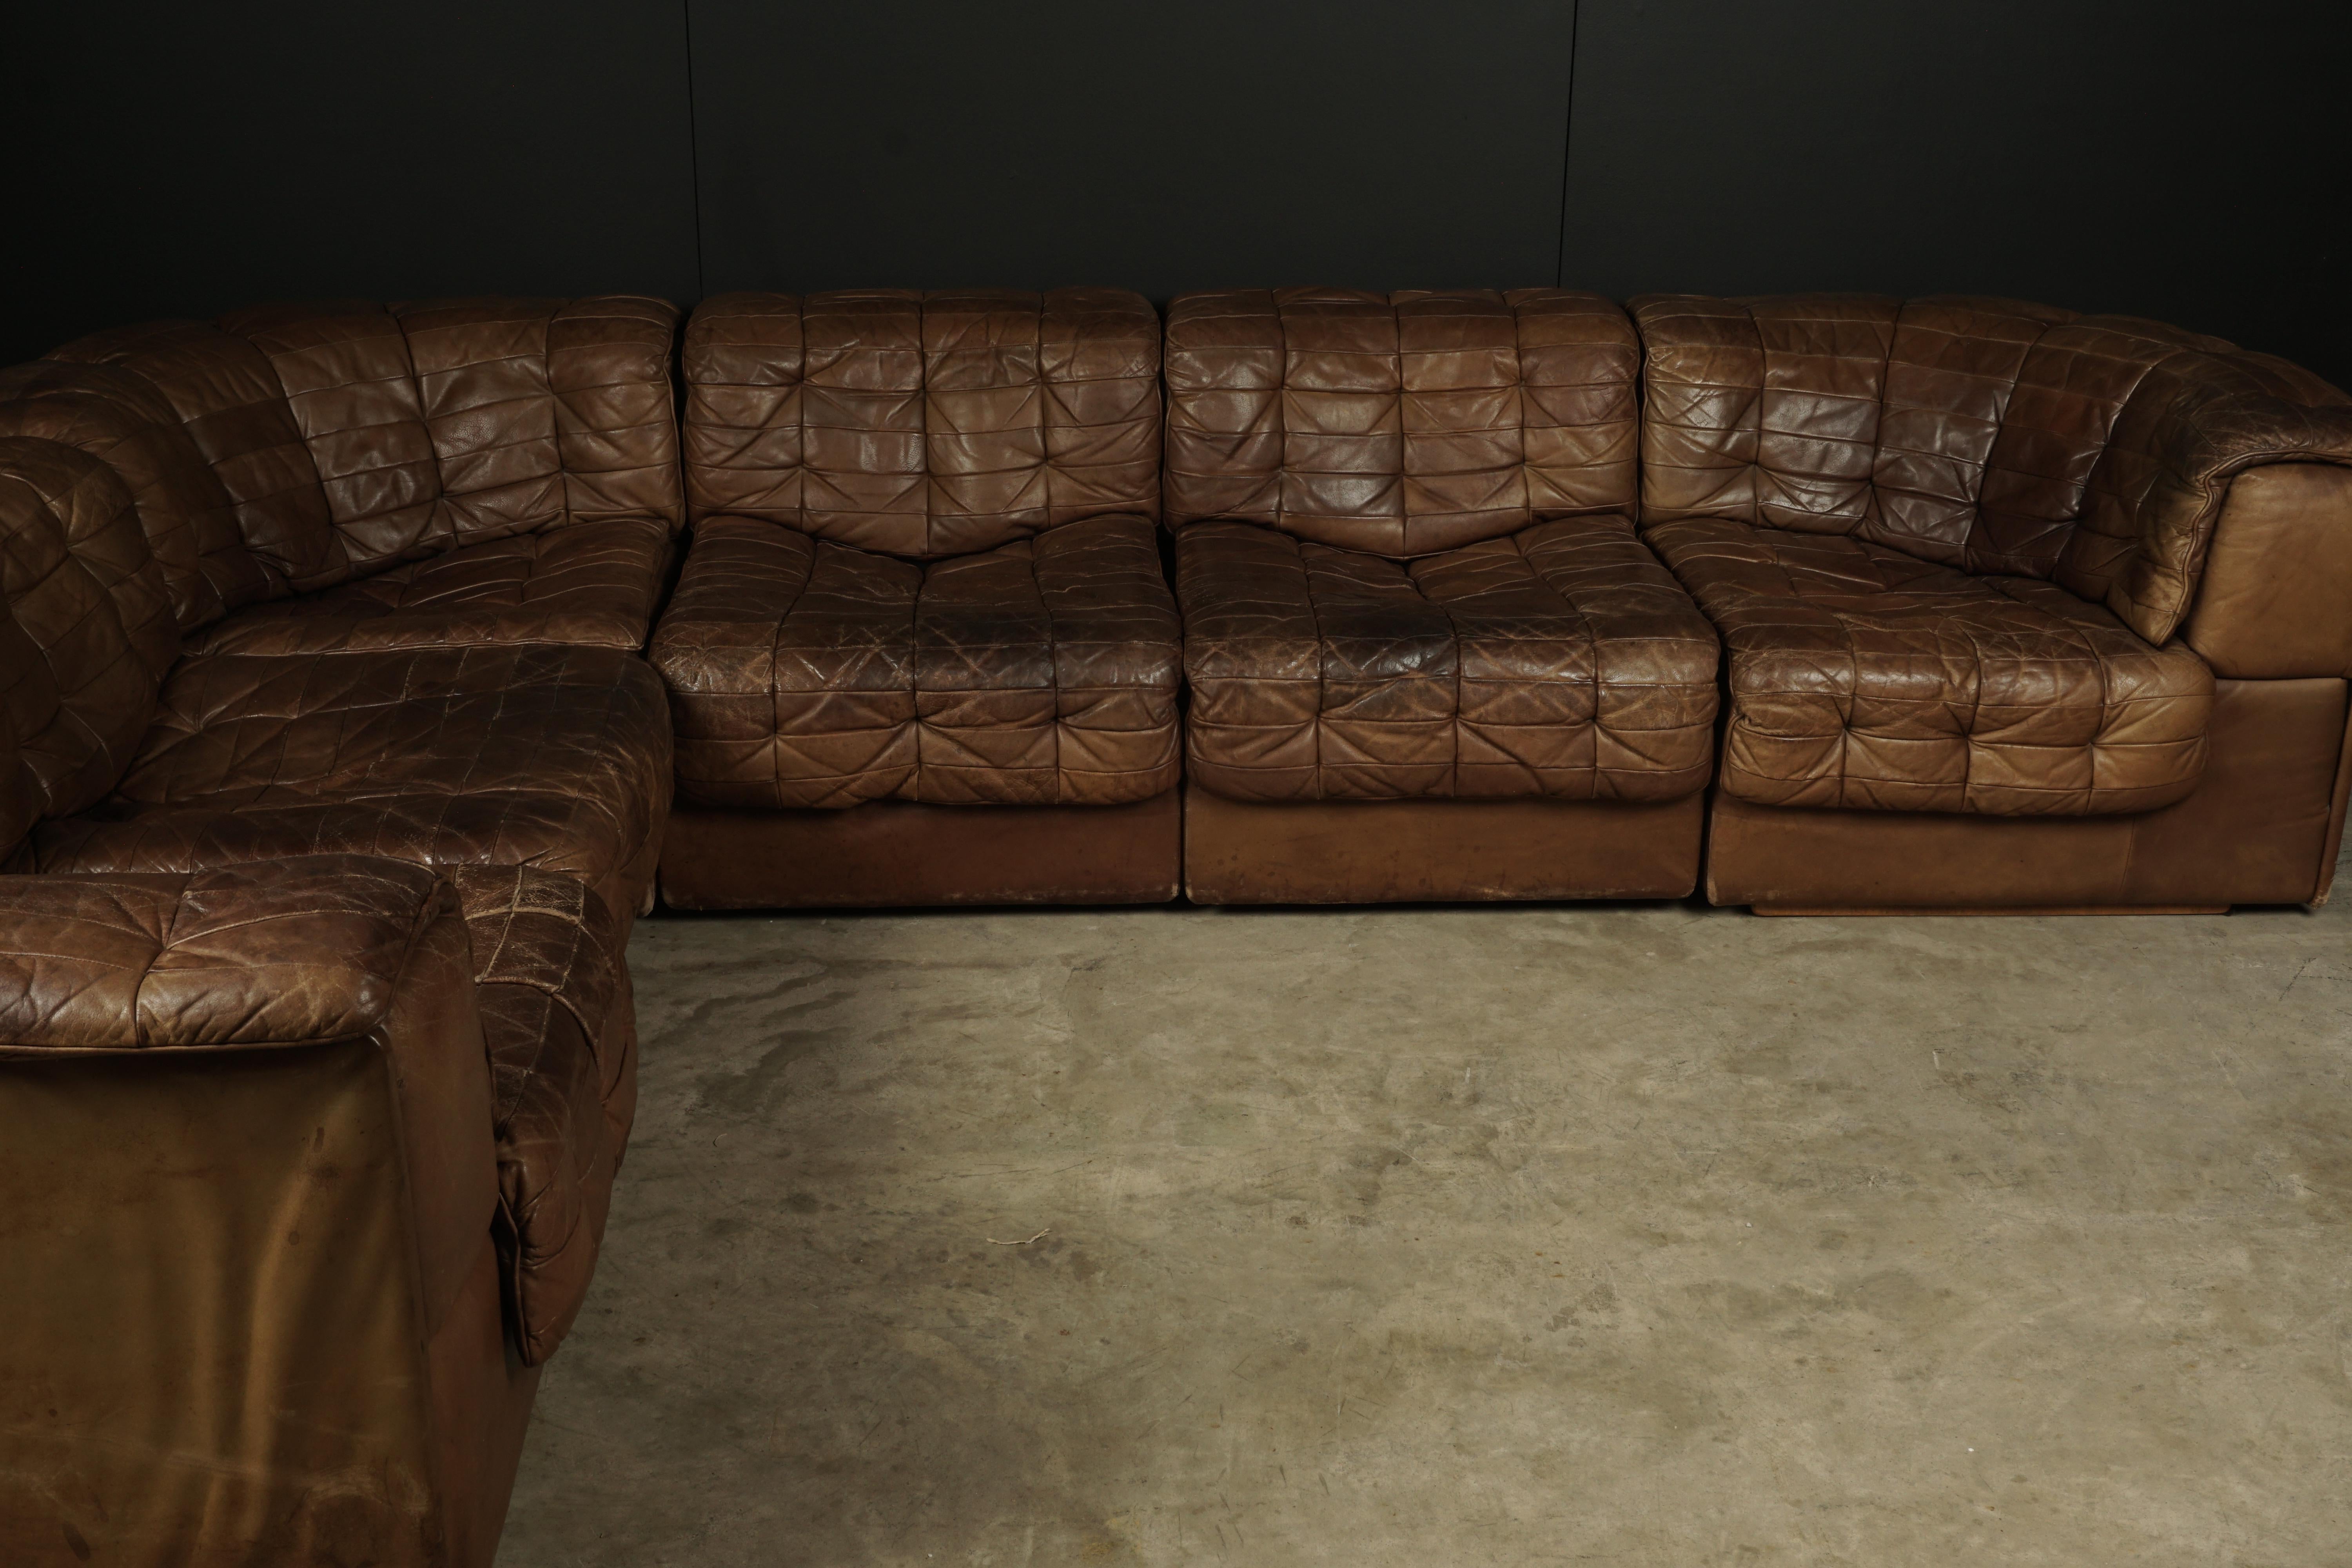 Rare vintage De Sede DS 11 patchwork leather sofa from Switzerland, circa 1970. Original cognac leather upholstery with great wear and patina. Six modular pieces. Each module is 61cm high and 64cm width, seating height is 36cm corner module is H